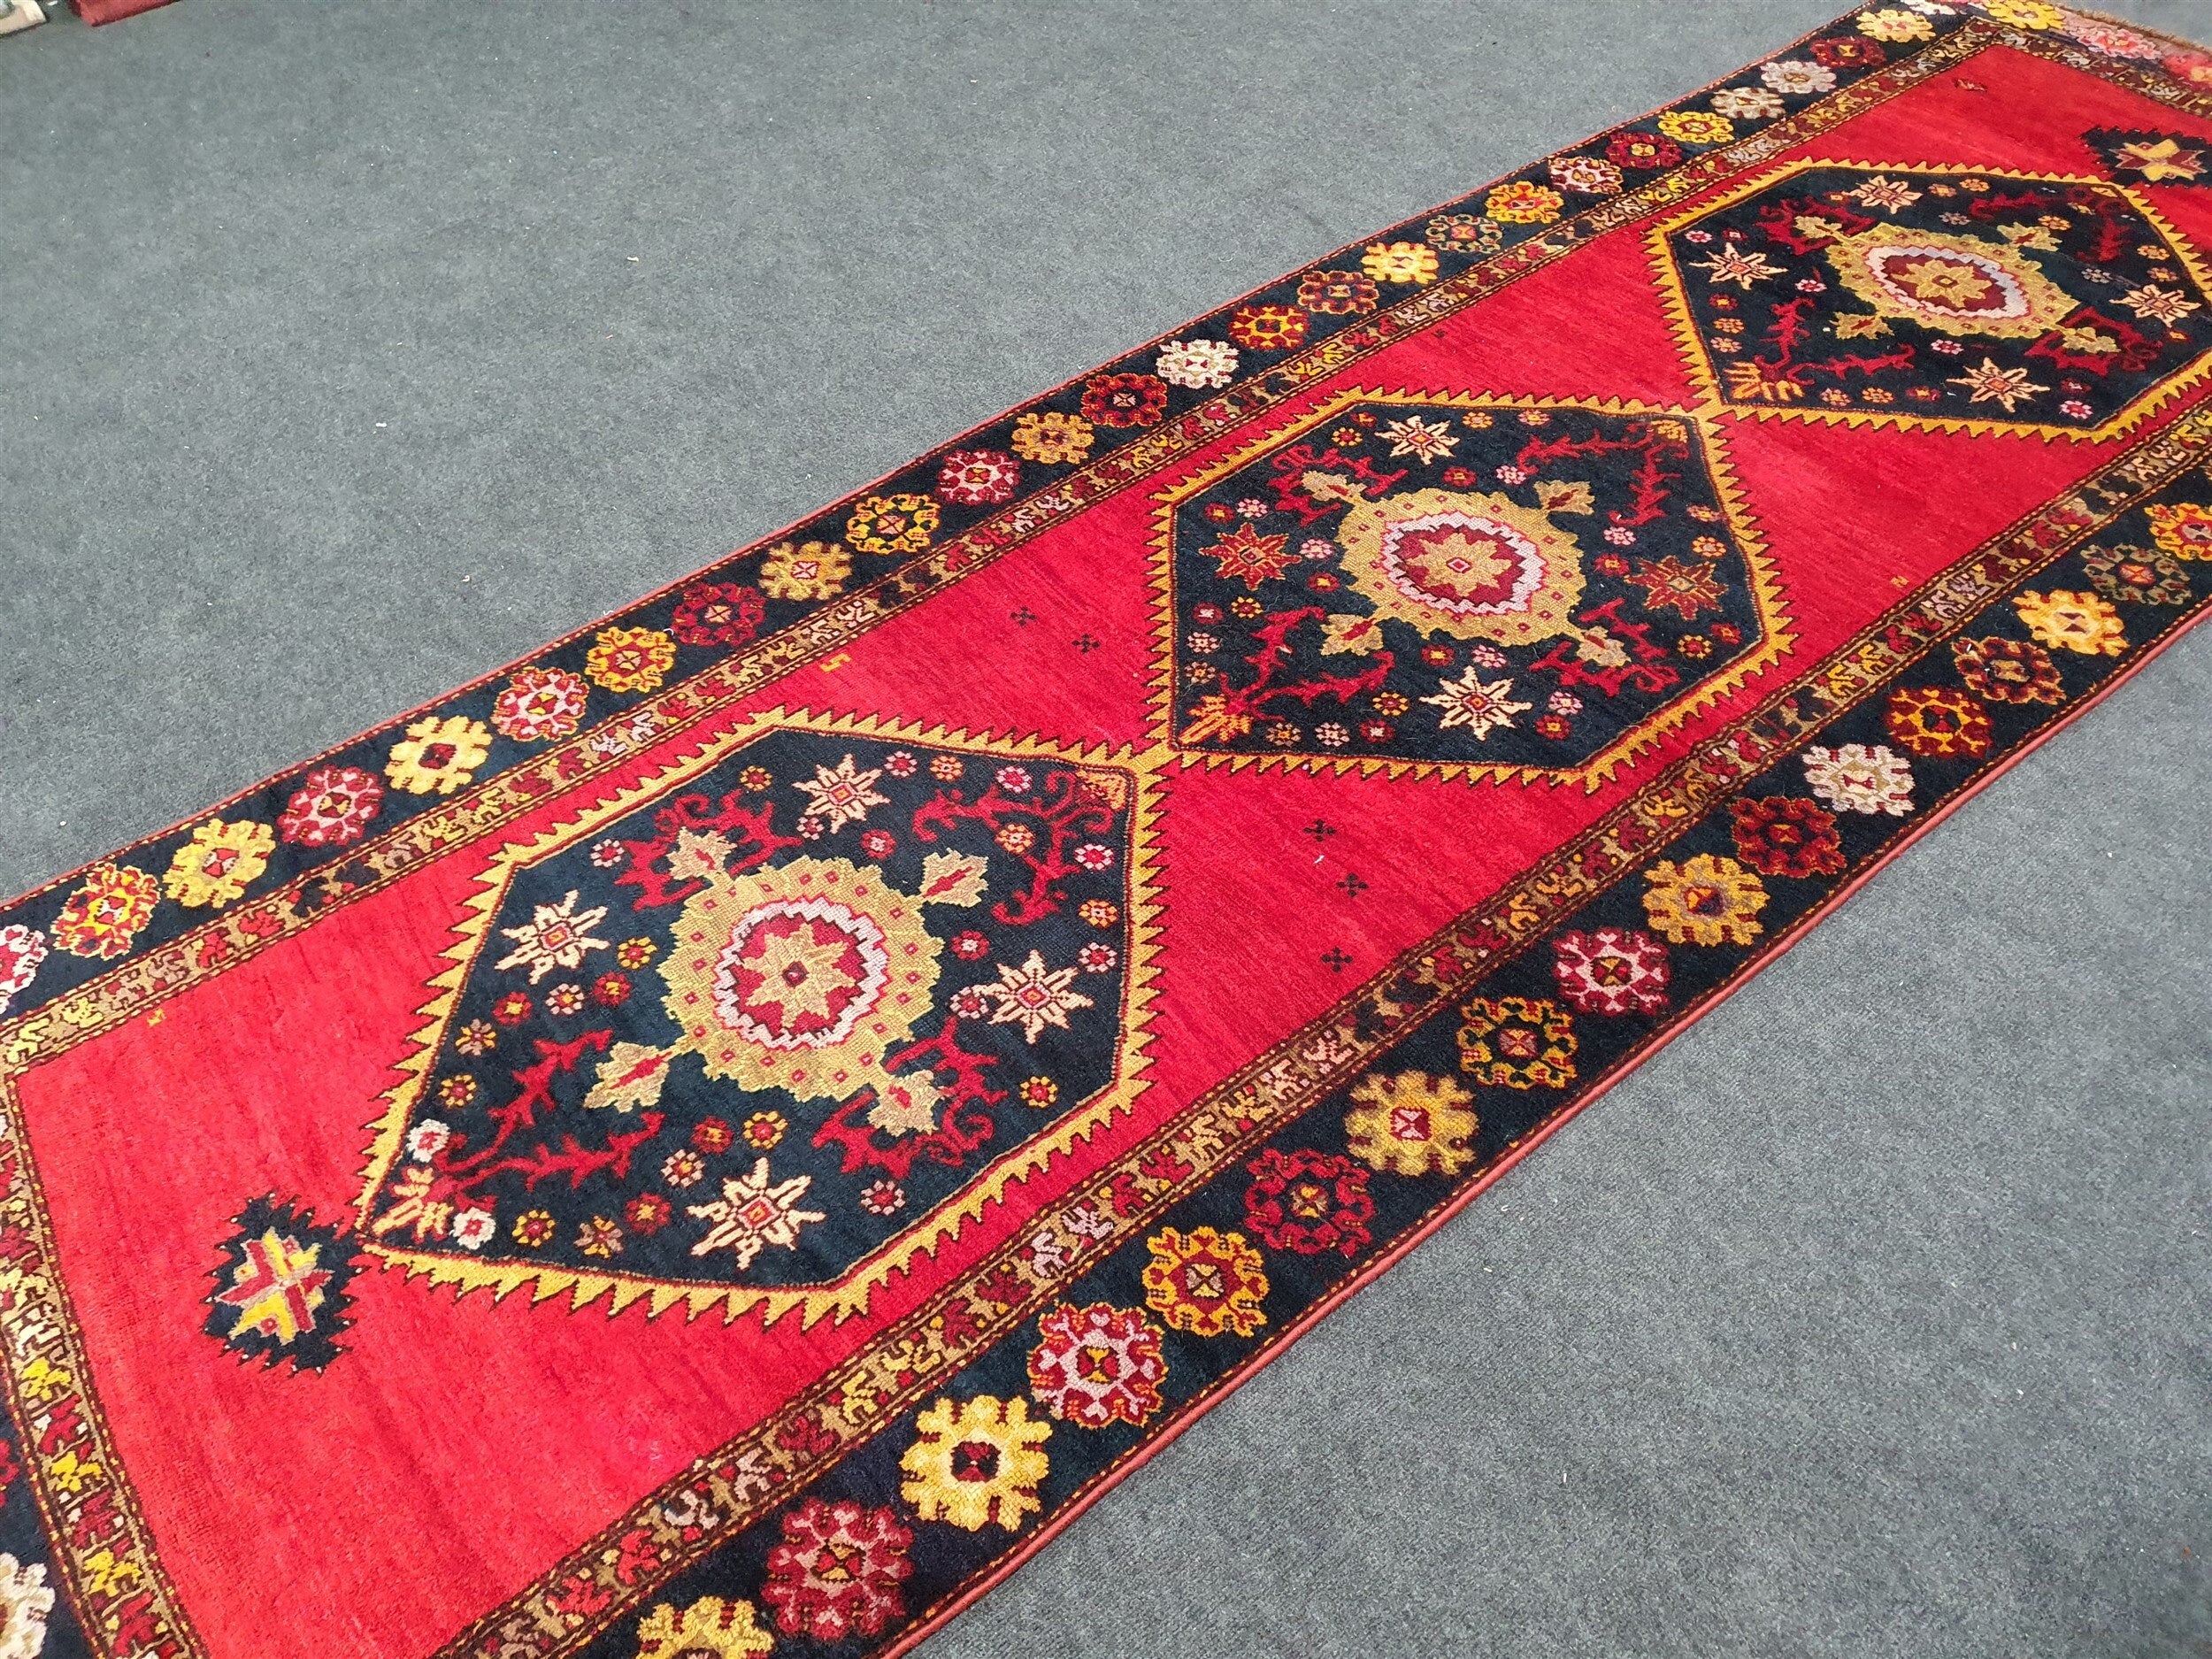 Persian Hallway Runner 11 x 3 ft Turkish Natural Wool Rug, Red with Blue and Brown Central Floral Medallions and Border Entry Corridor Rug